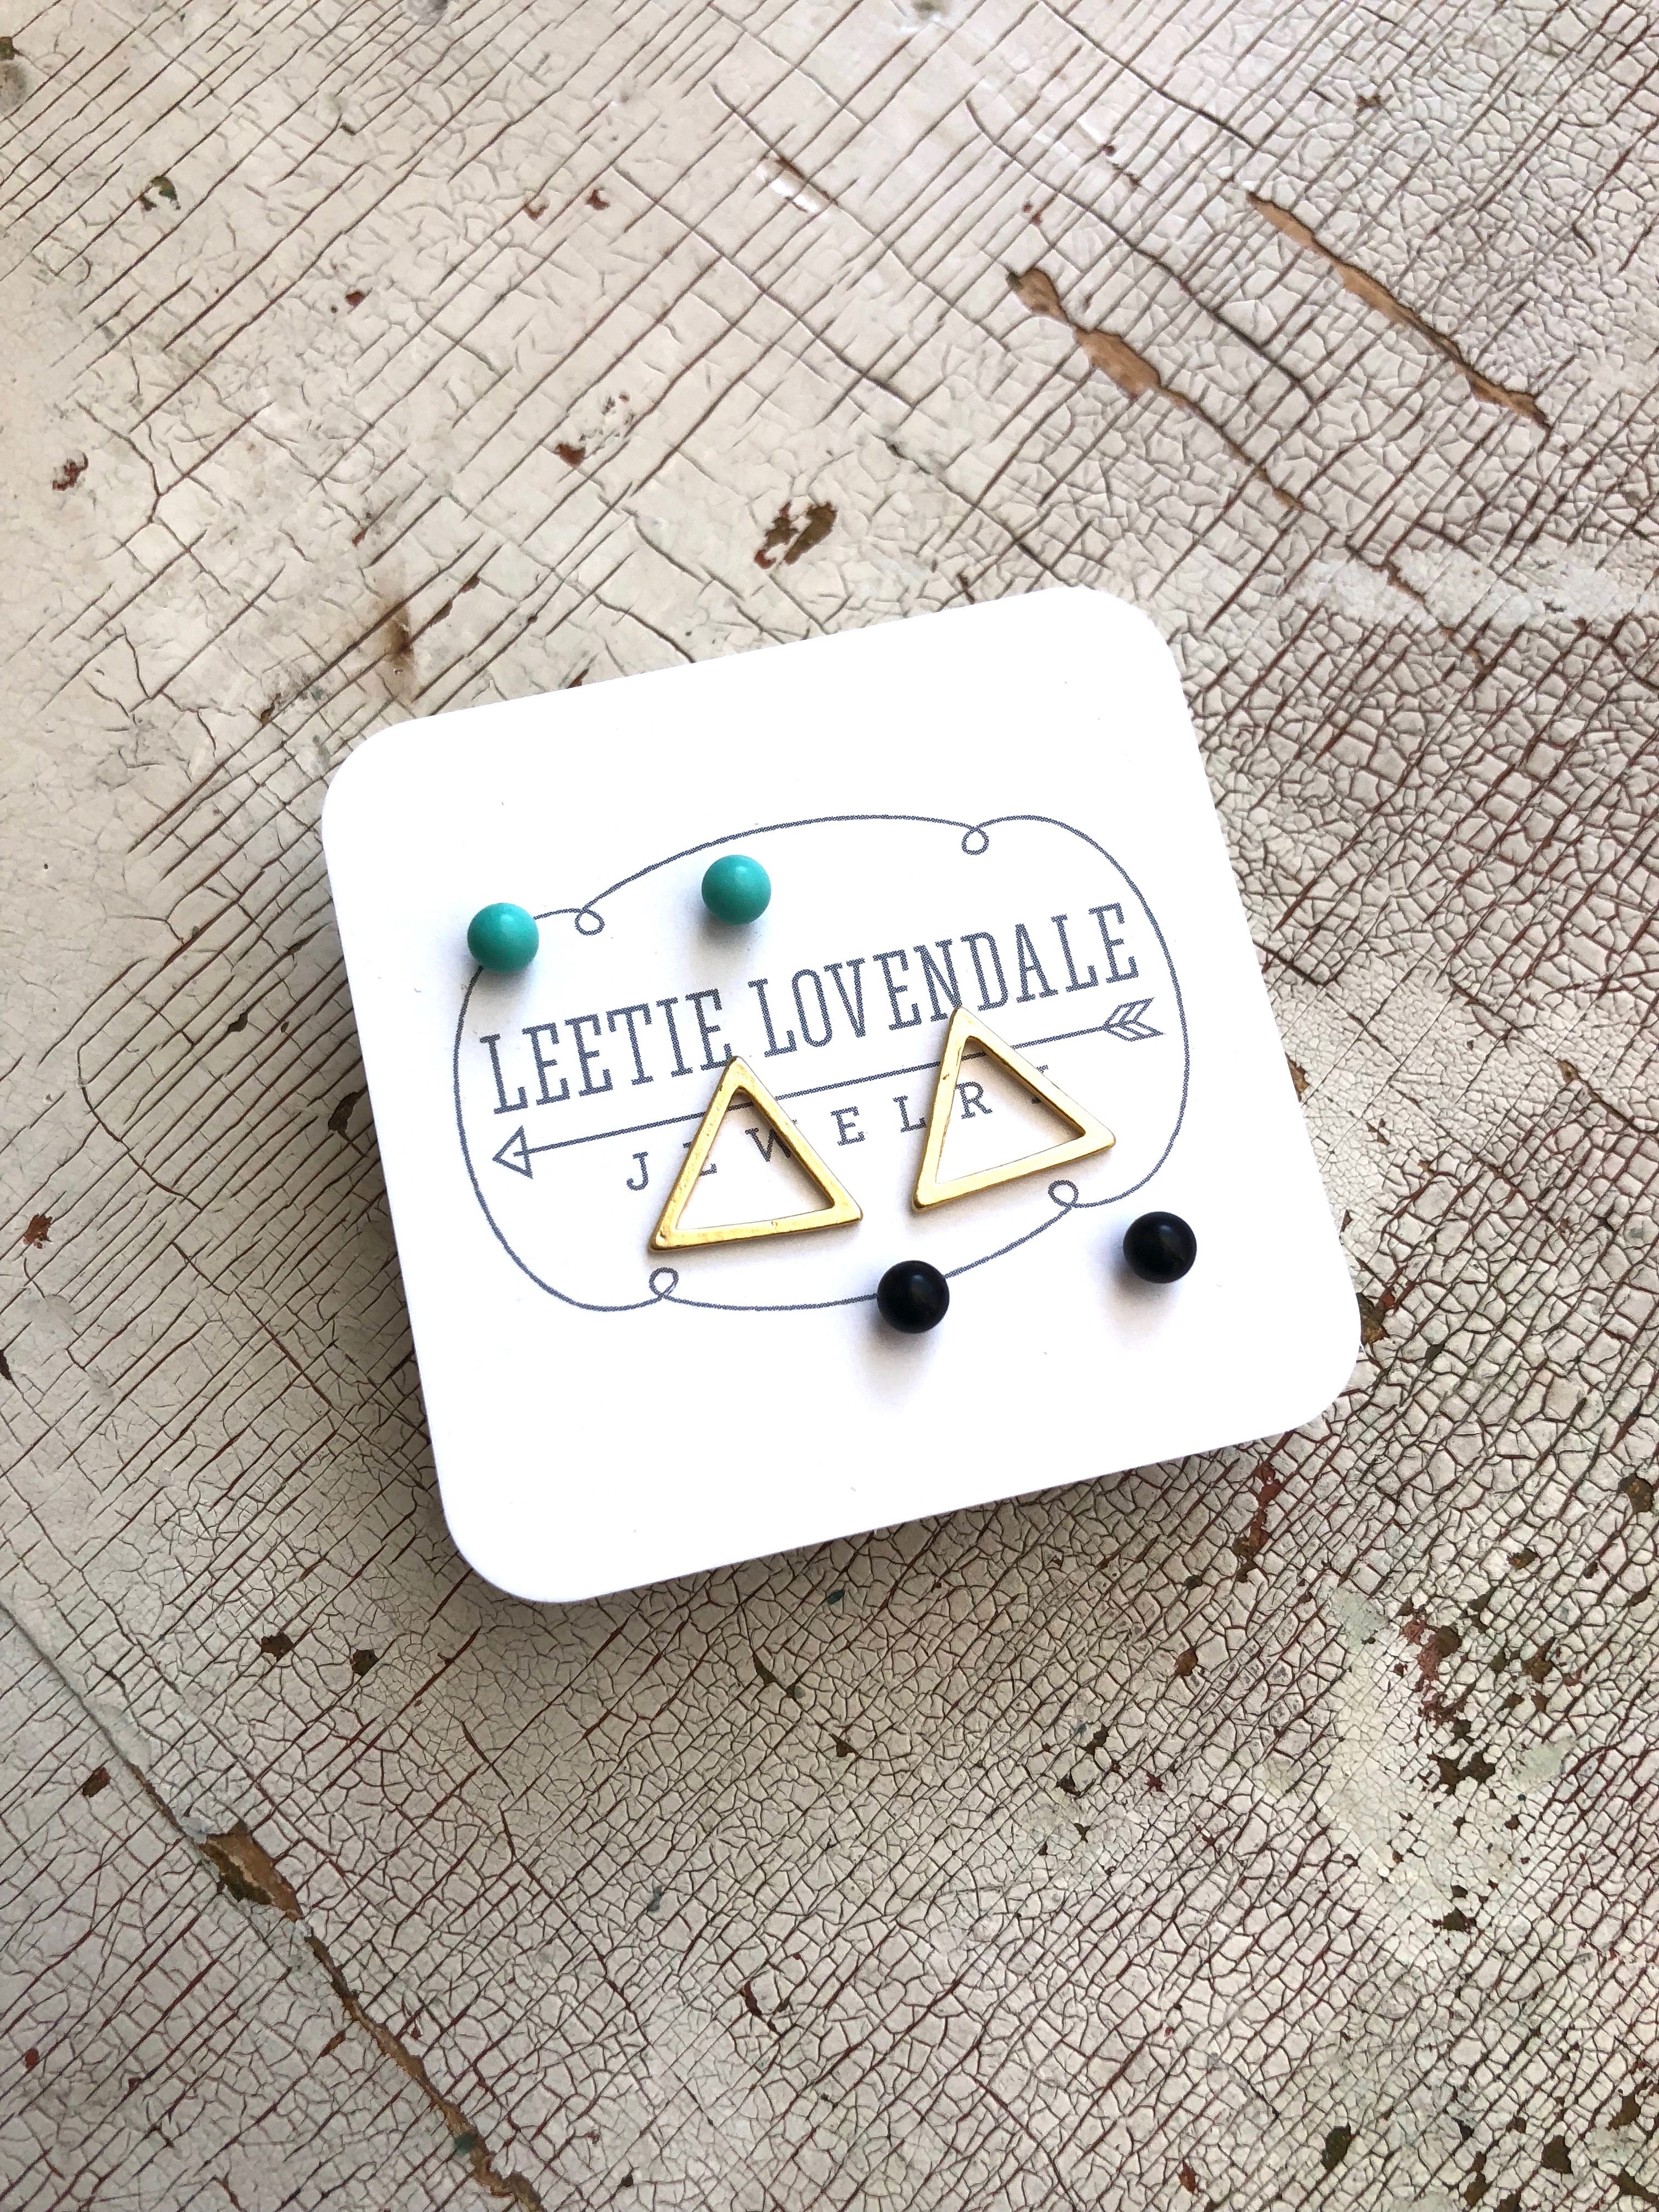 Mint Jet Black &amp; Frosted Gold Triangle Tiny Geo Stud Earrings